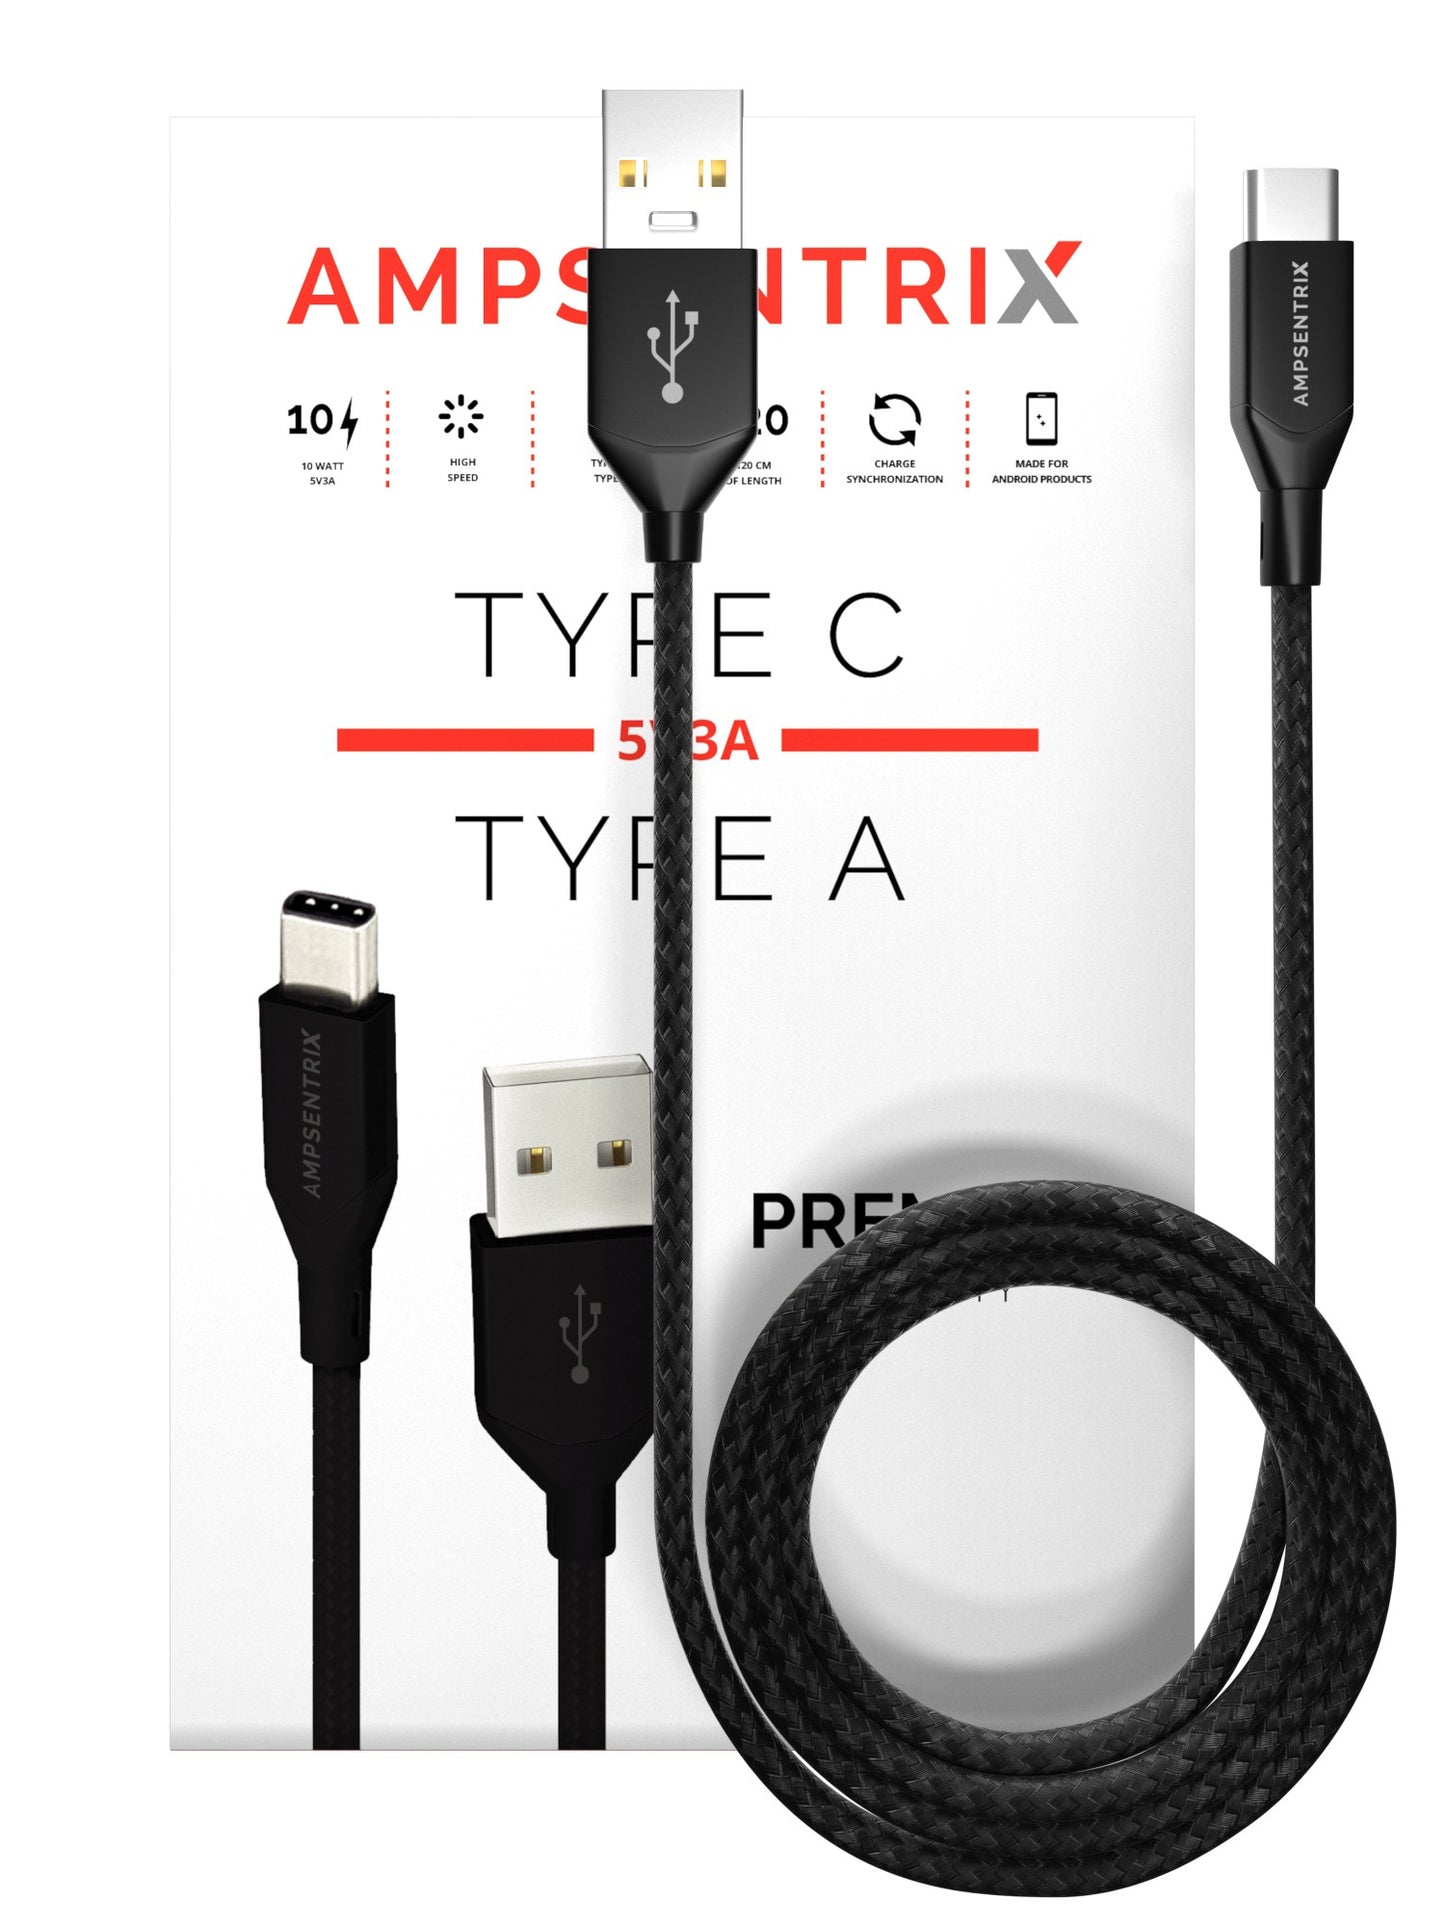 3 ft USB Type C to USB Type A Cable (AmpSentrix) (Infinity) (Black)